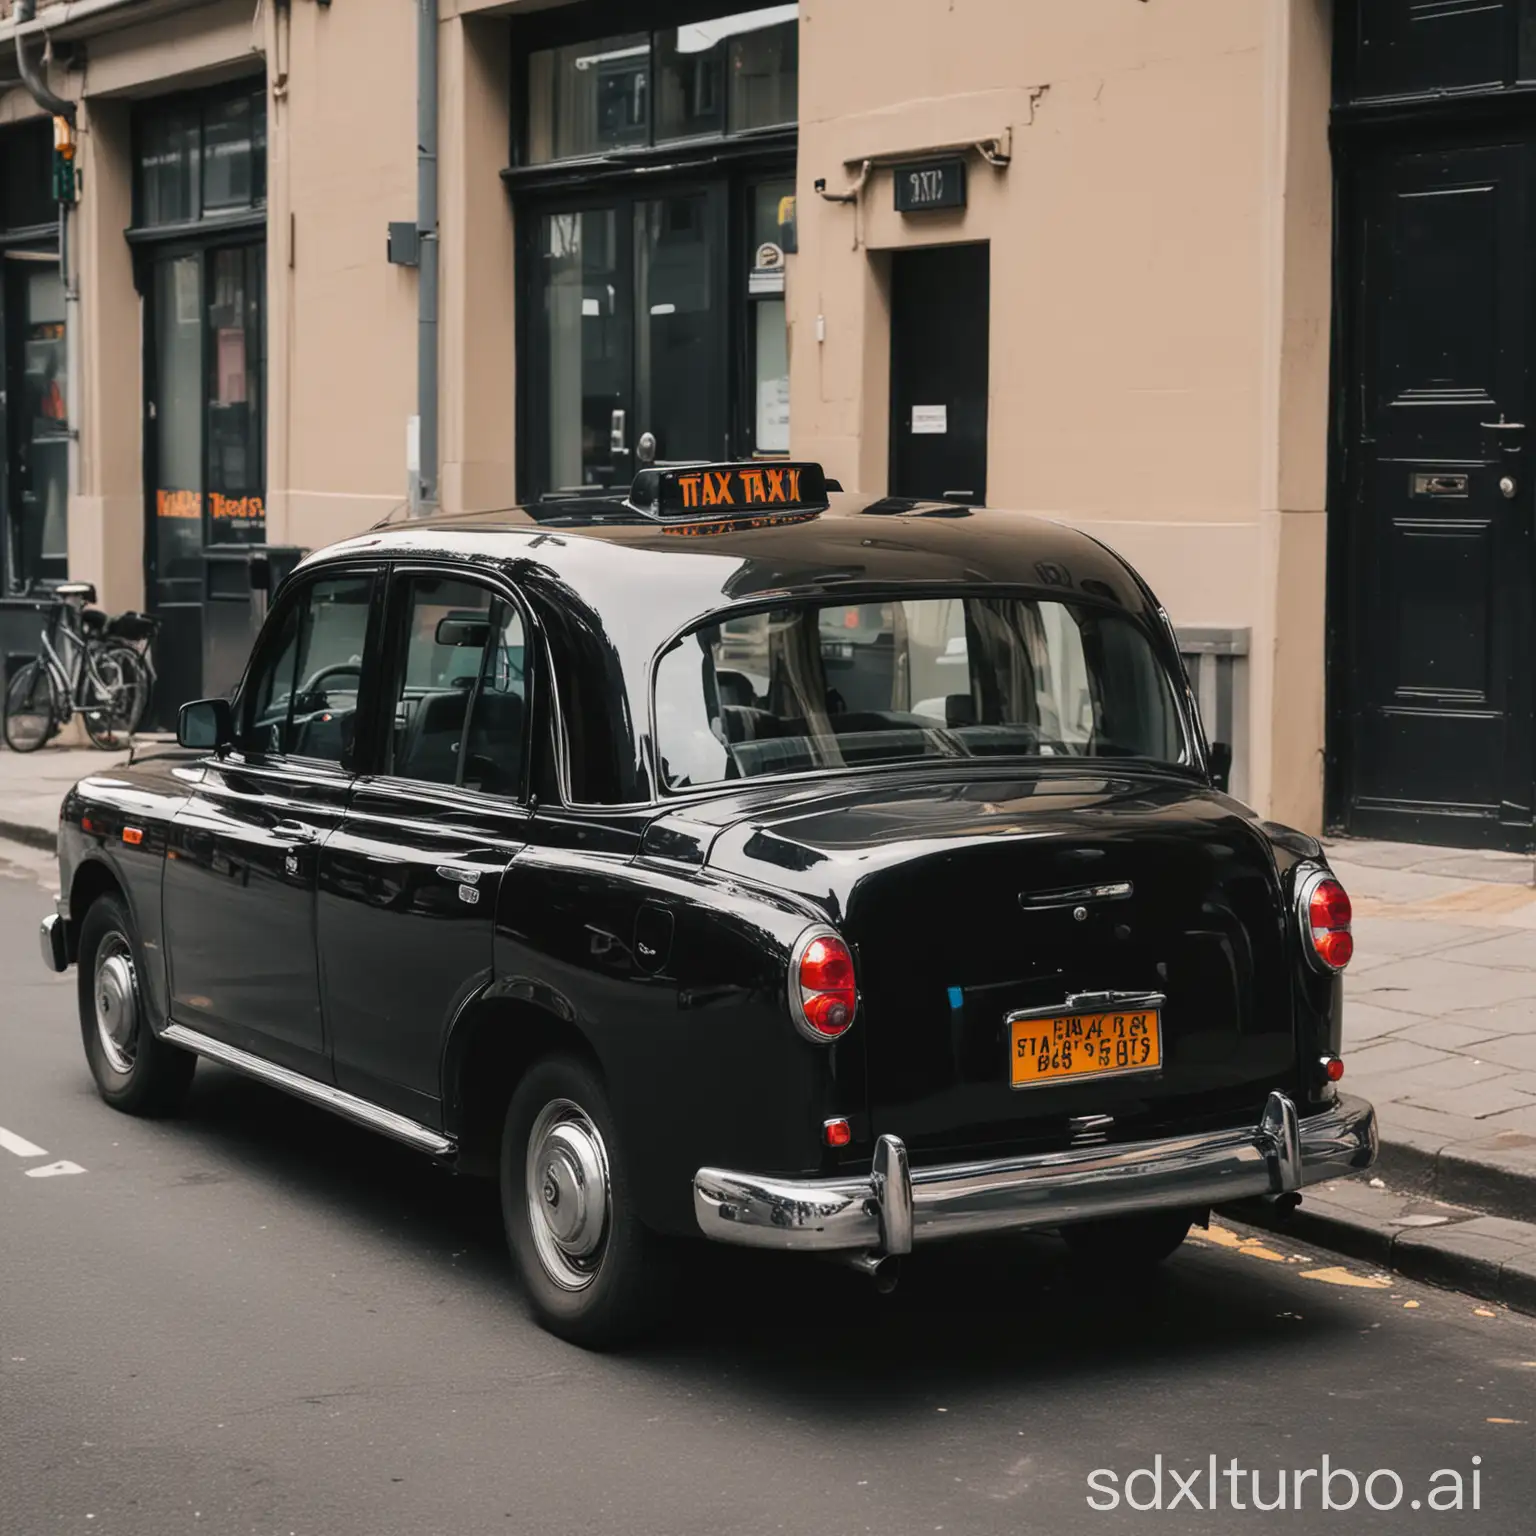 A black taxi cab parked on the side of the road. The taxi is clean and well-maintained, with a shiny black paint job and polished chrome trim. The interior of the taxi is visible through the open door. The back seat is spacious and comfortable, with plenty of room for passengers.